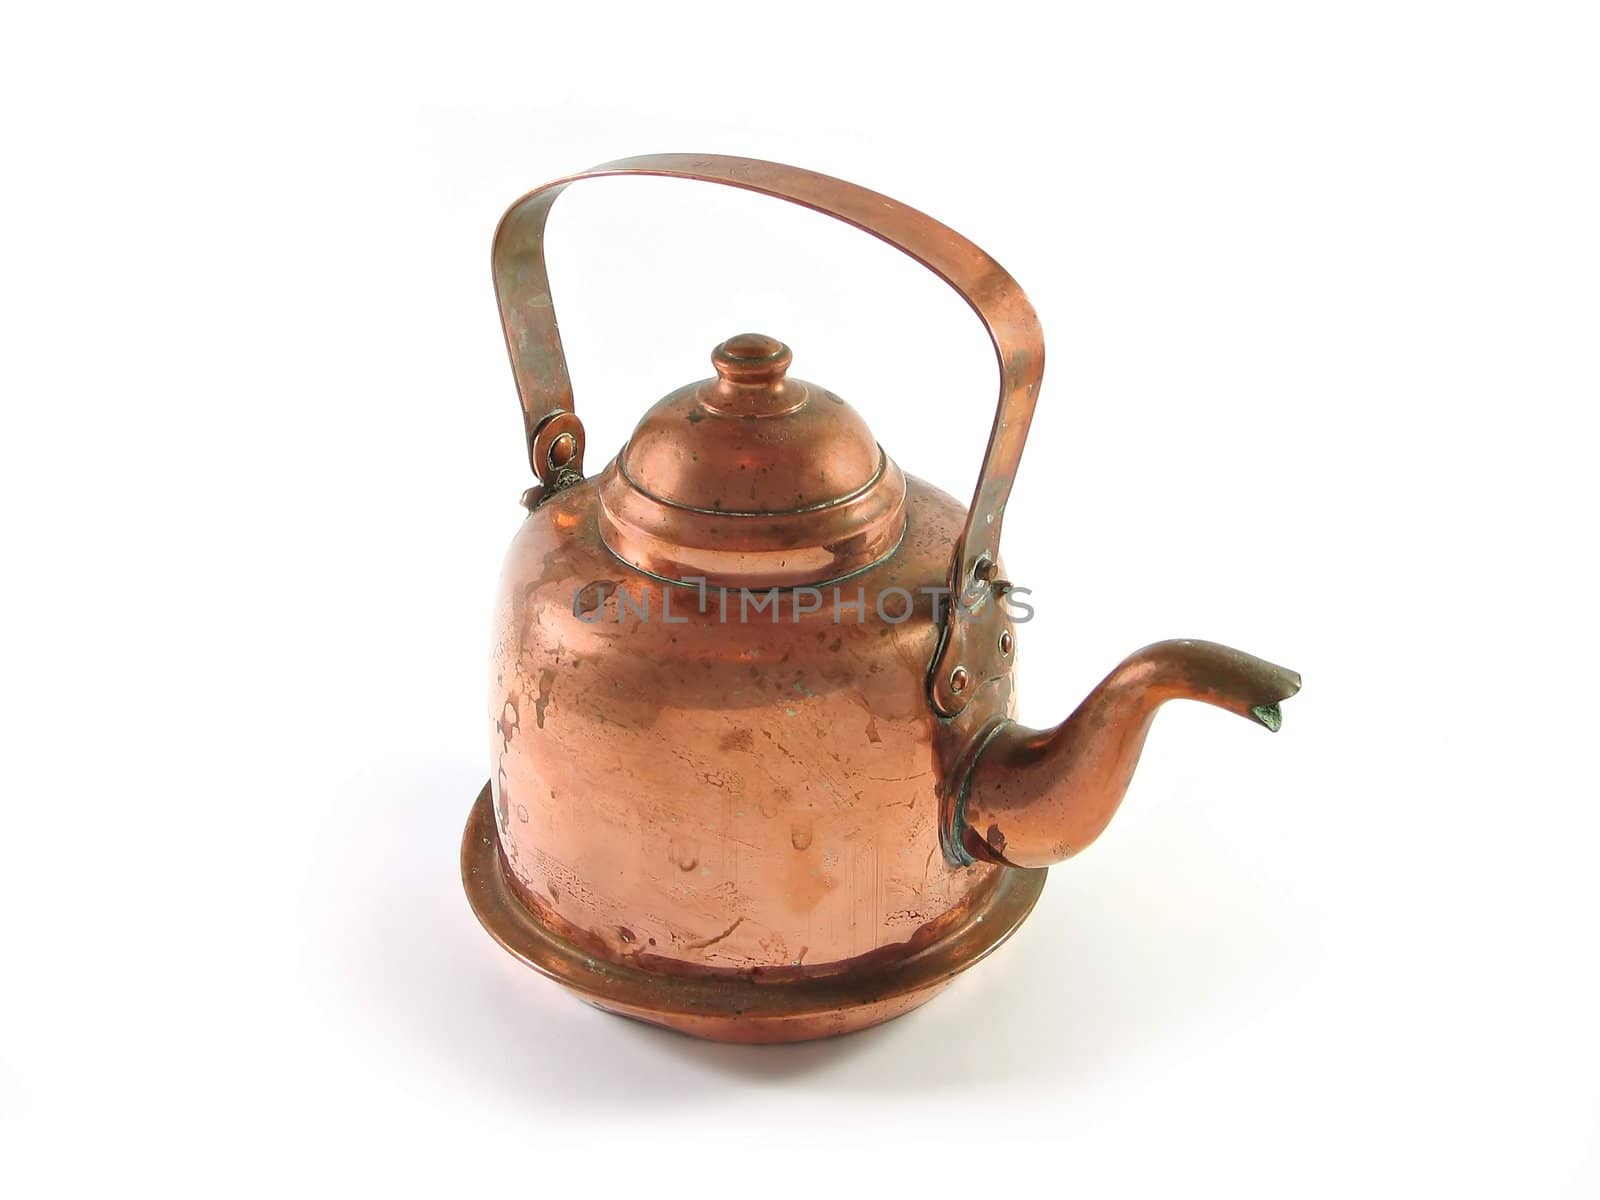 Antique copper brass kettle isolated on white